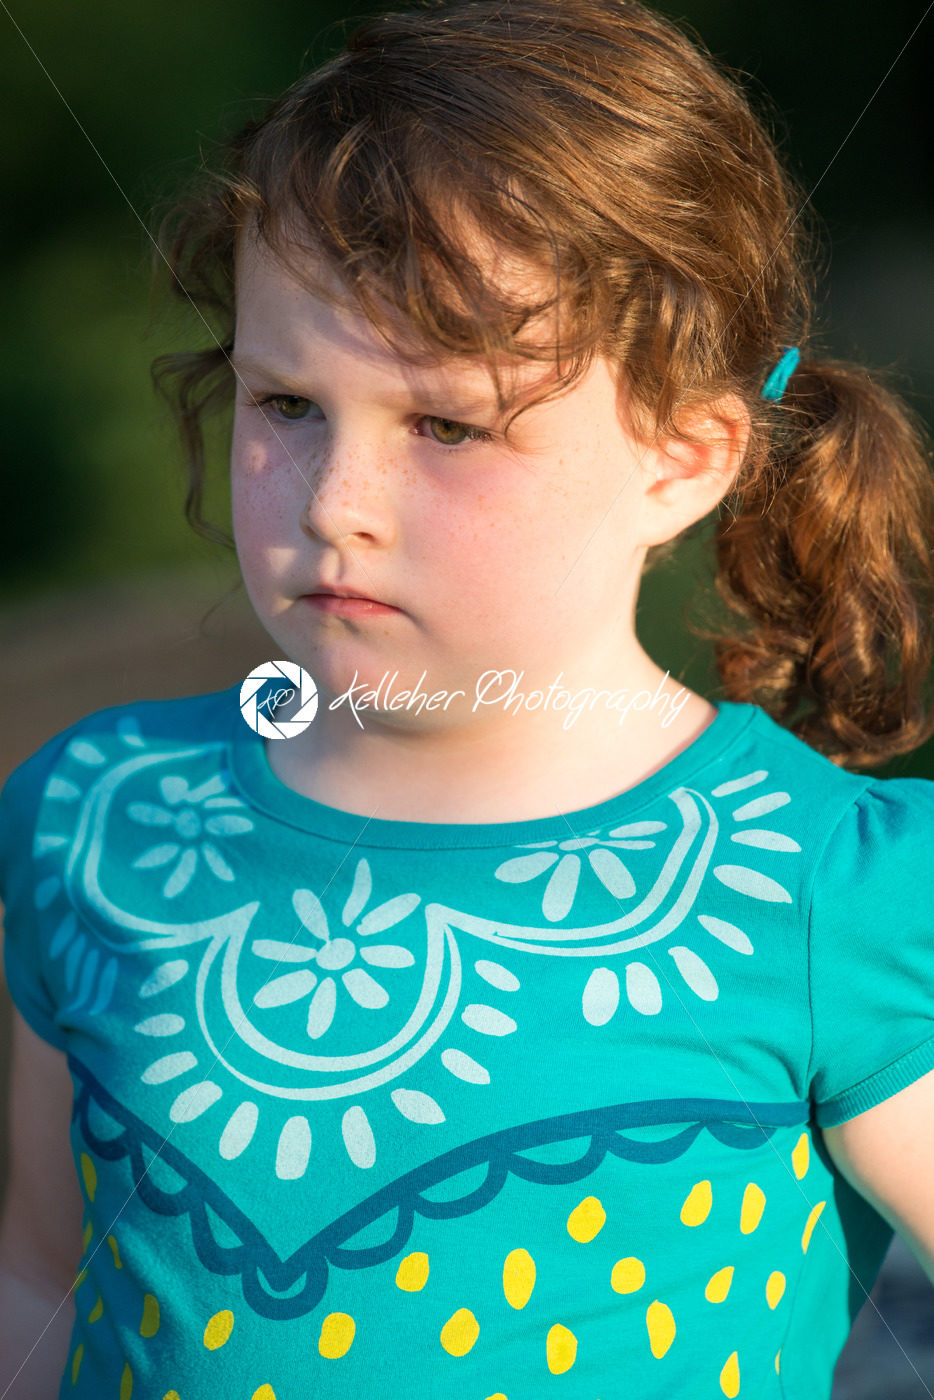 Portrait of beautiful attractive young girl thinking outside at sunset - Kelleher Photography Store